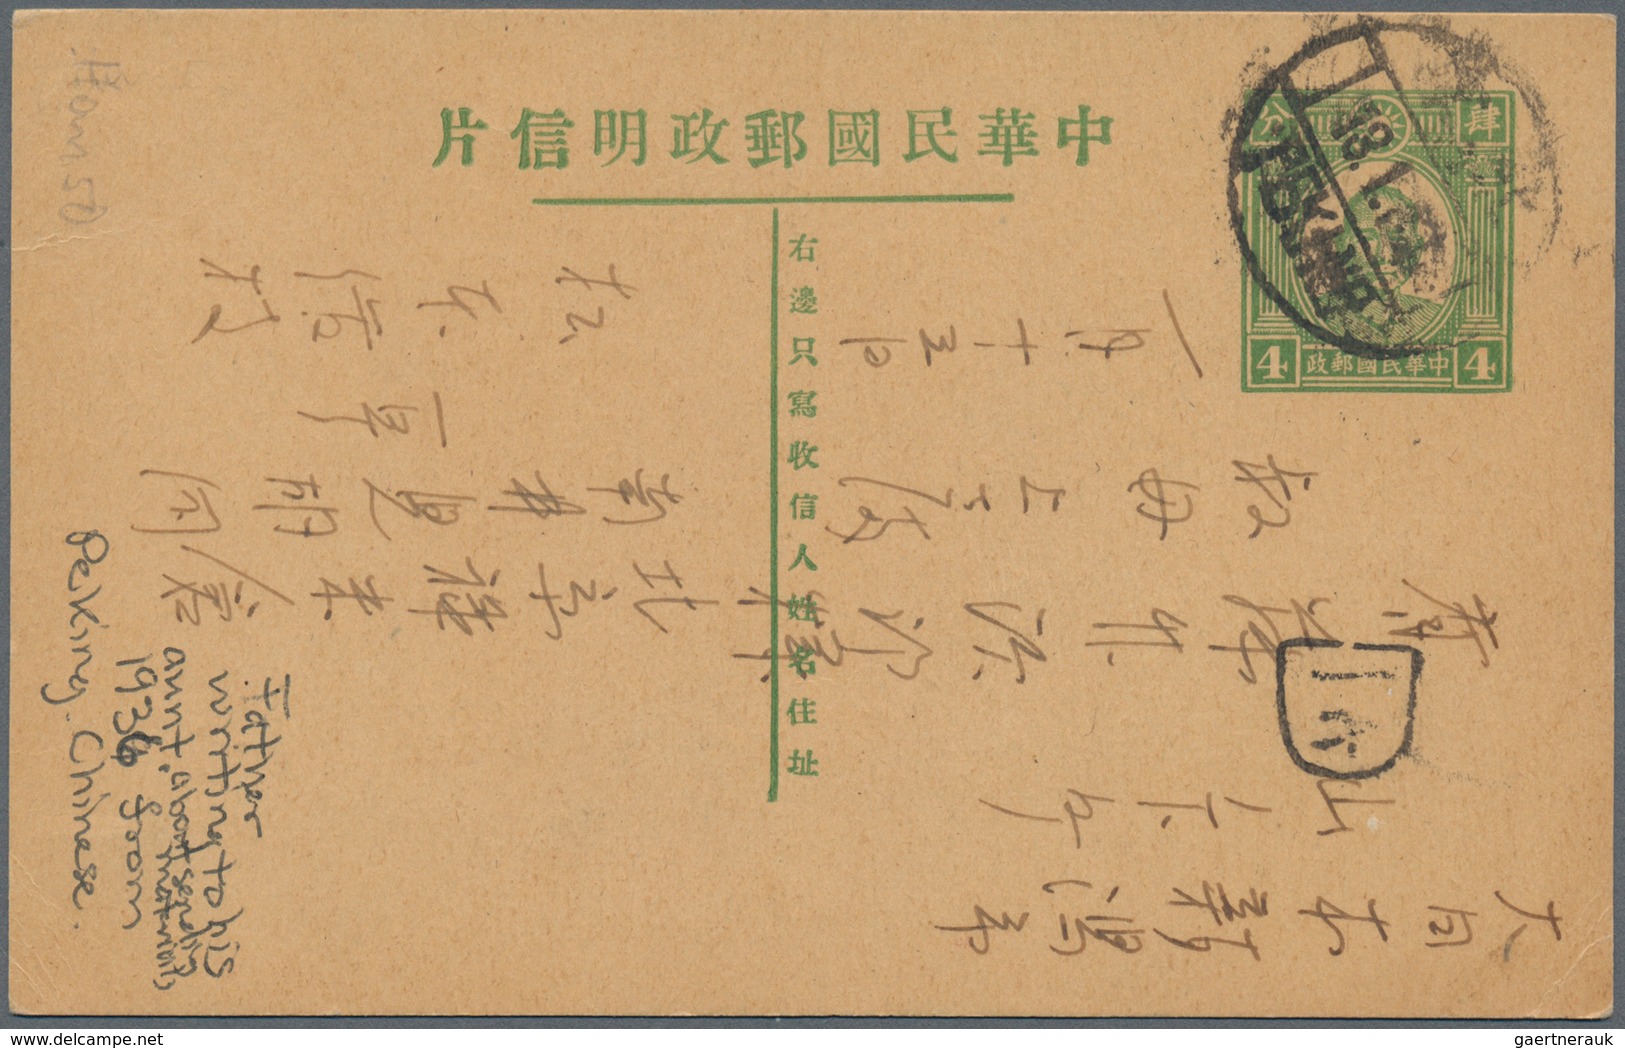 China - Ganzsachen: 1930/47 (ca.), stationery cards, Dr. Sun imprint mint (12) and used (9, 6 are ct